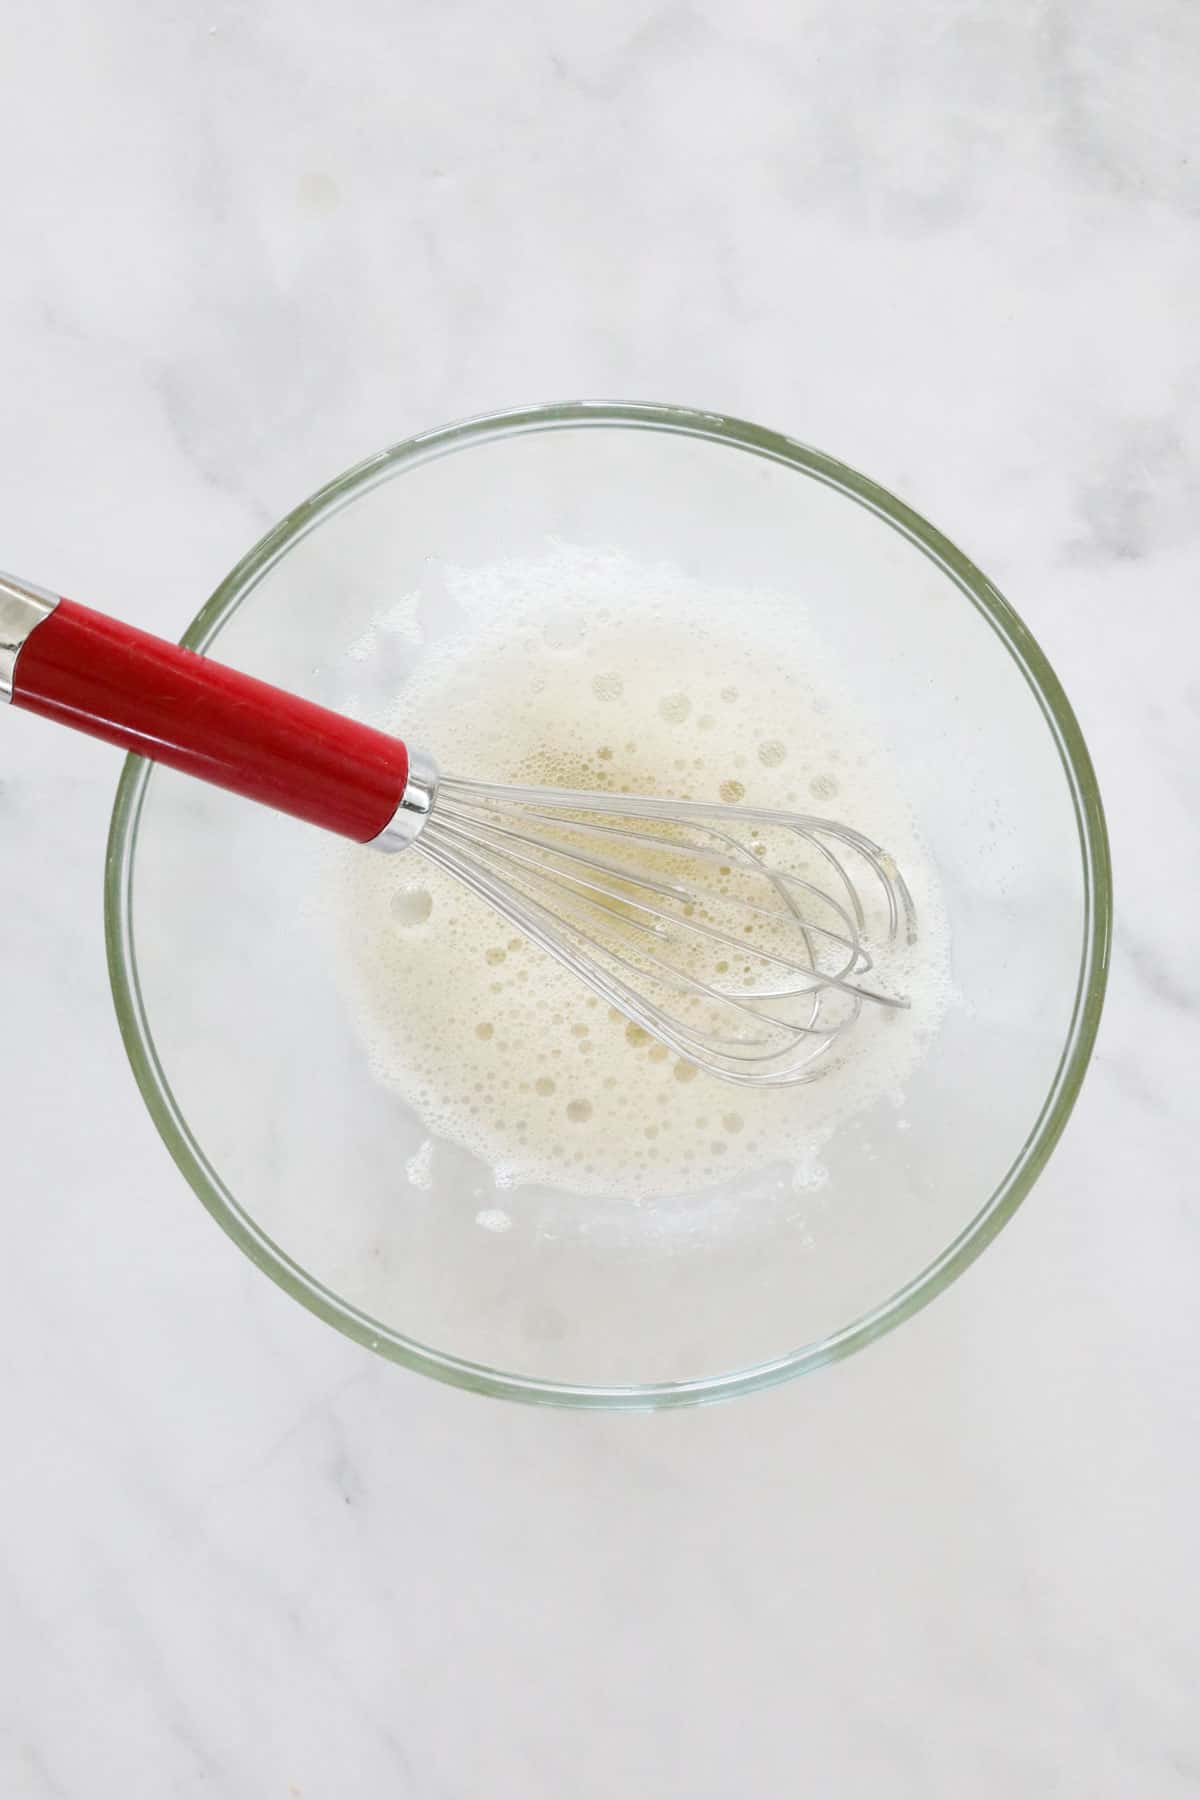 Gelatine in a glass bowl with a whisk.